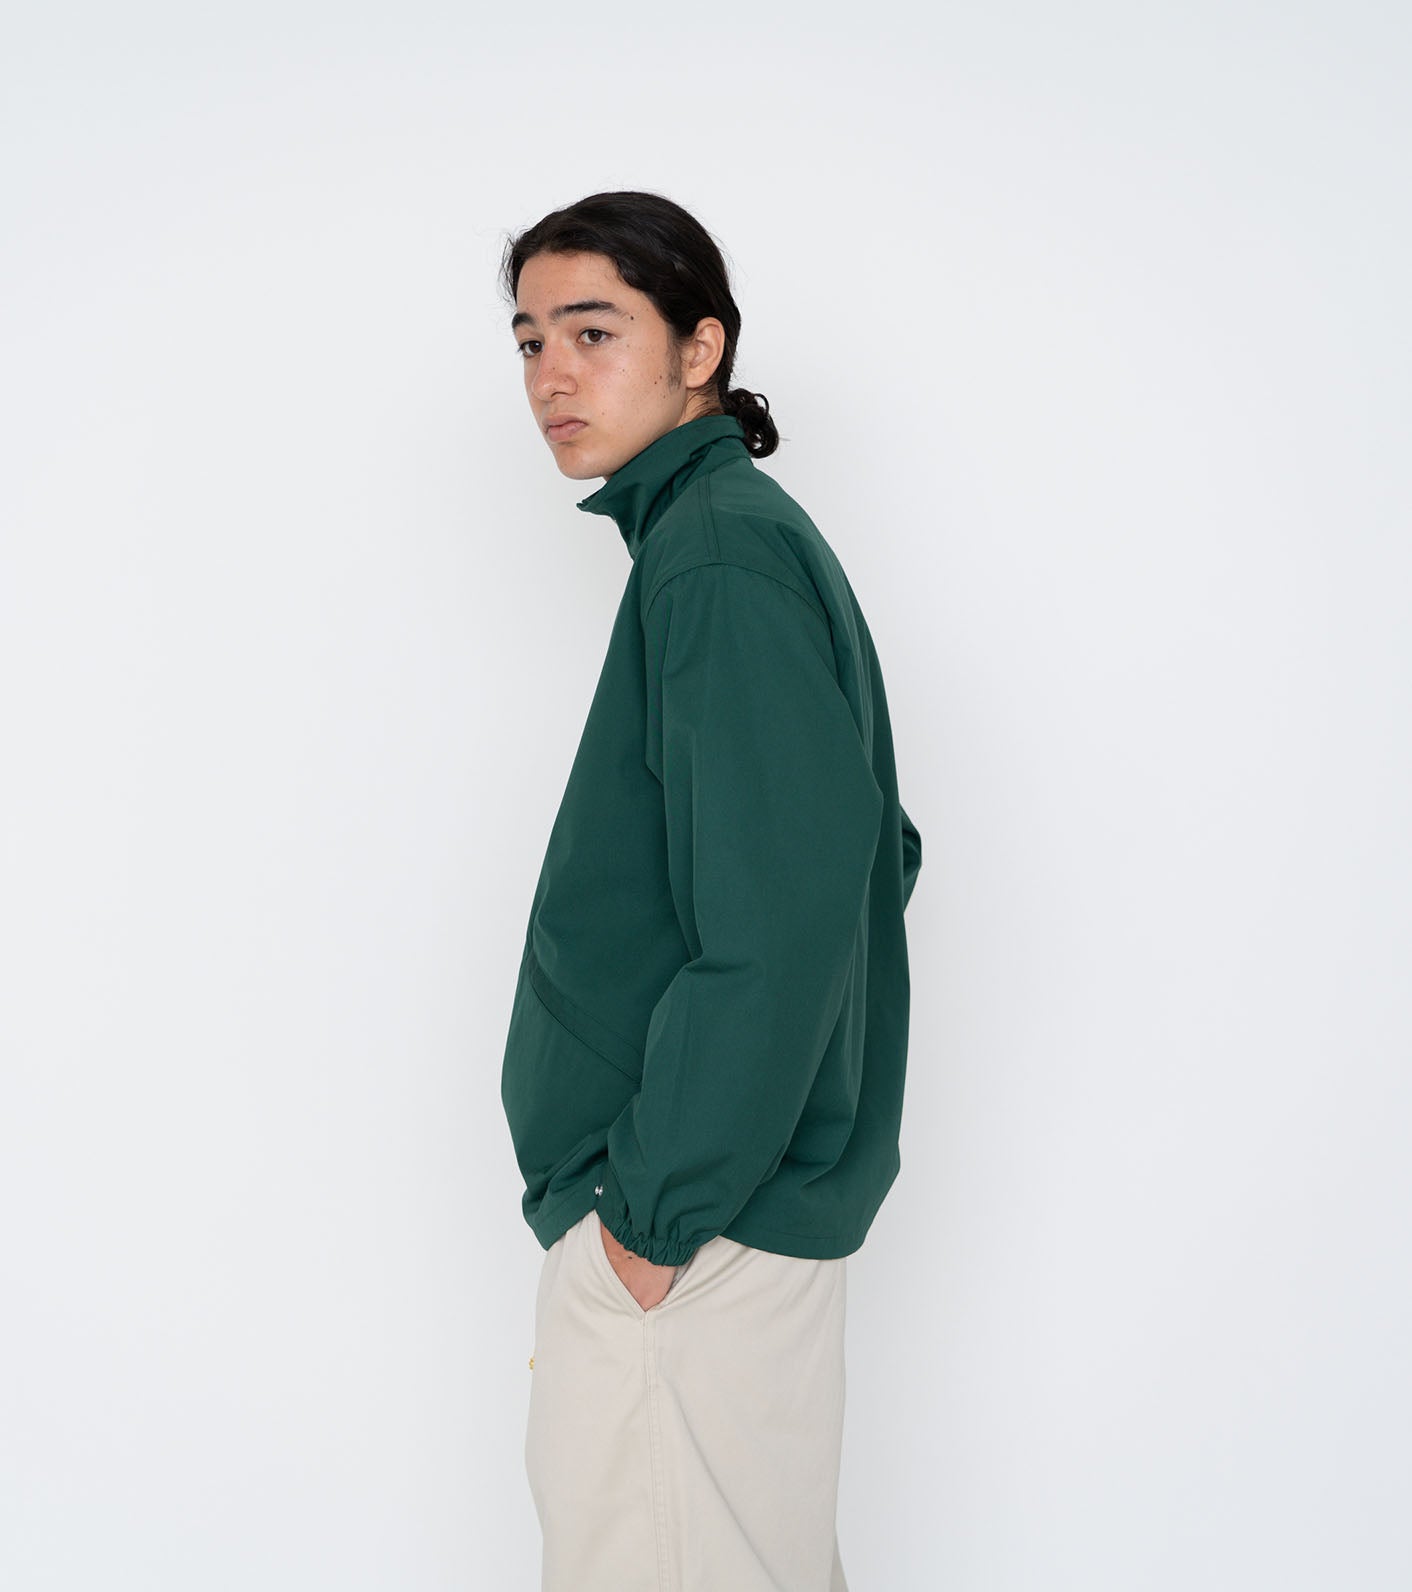 THE NORTH FACE PURPLE LABEL 65/35 Field Jacket